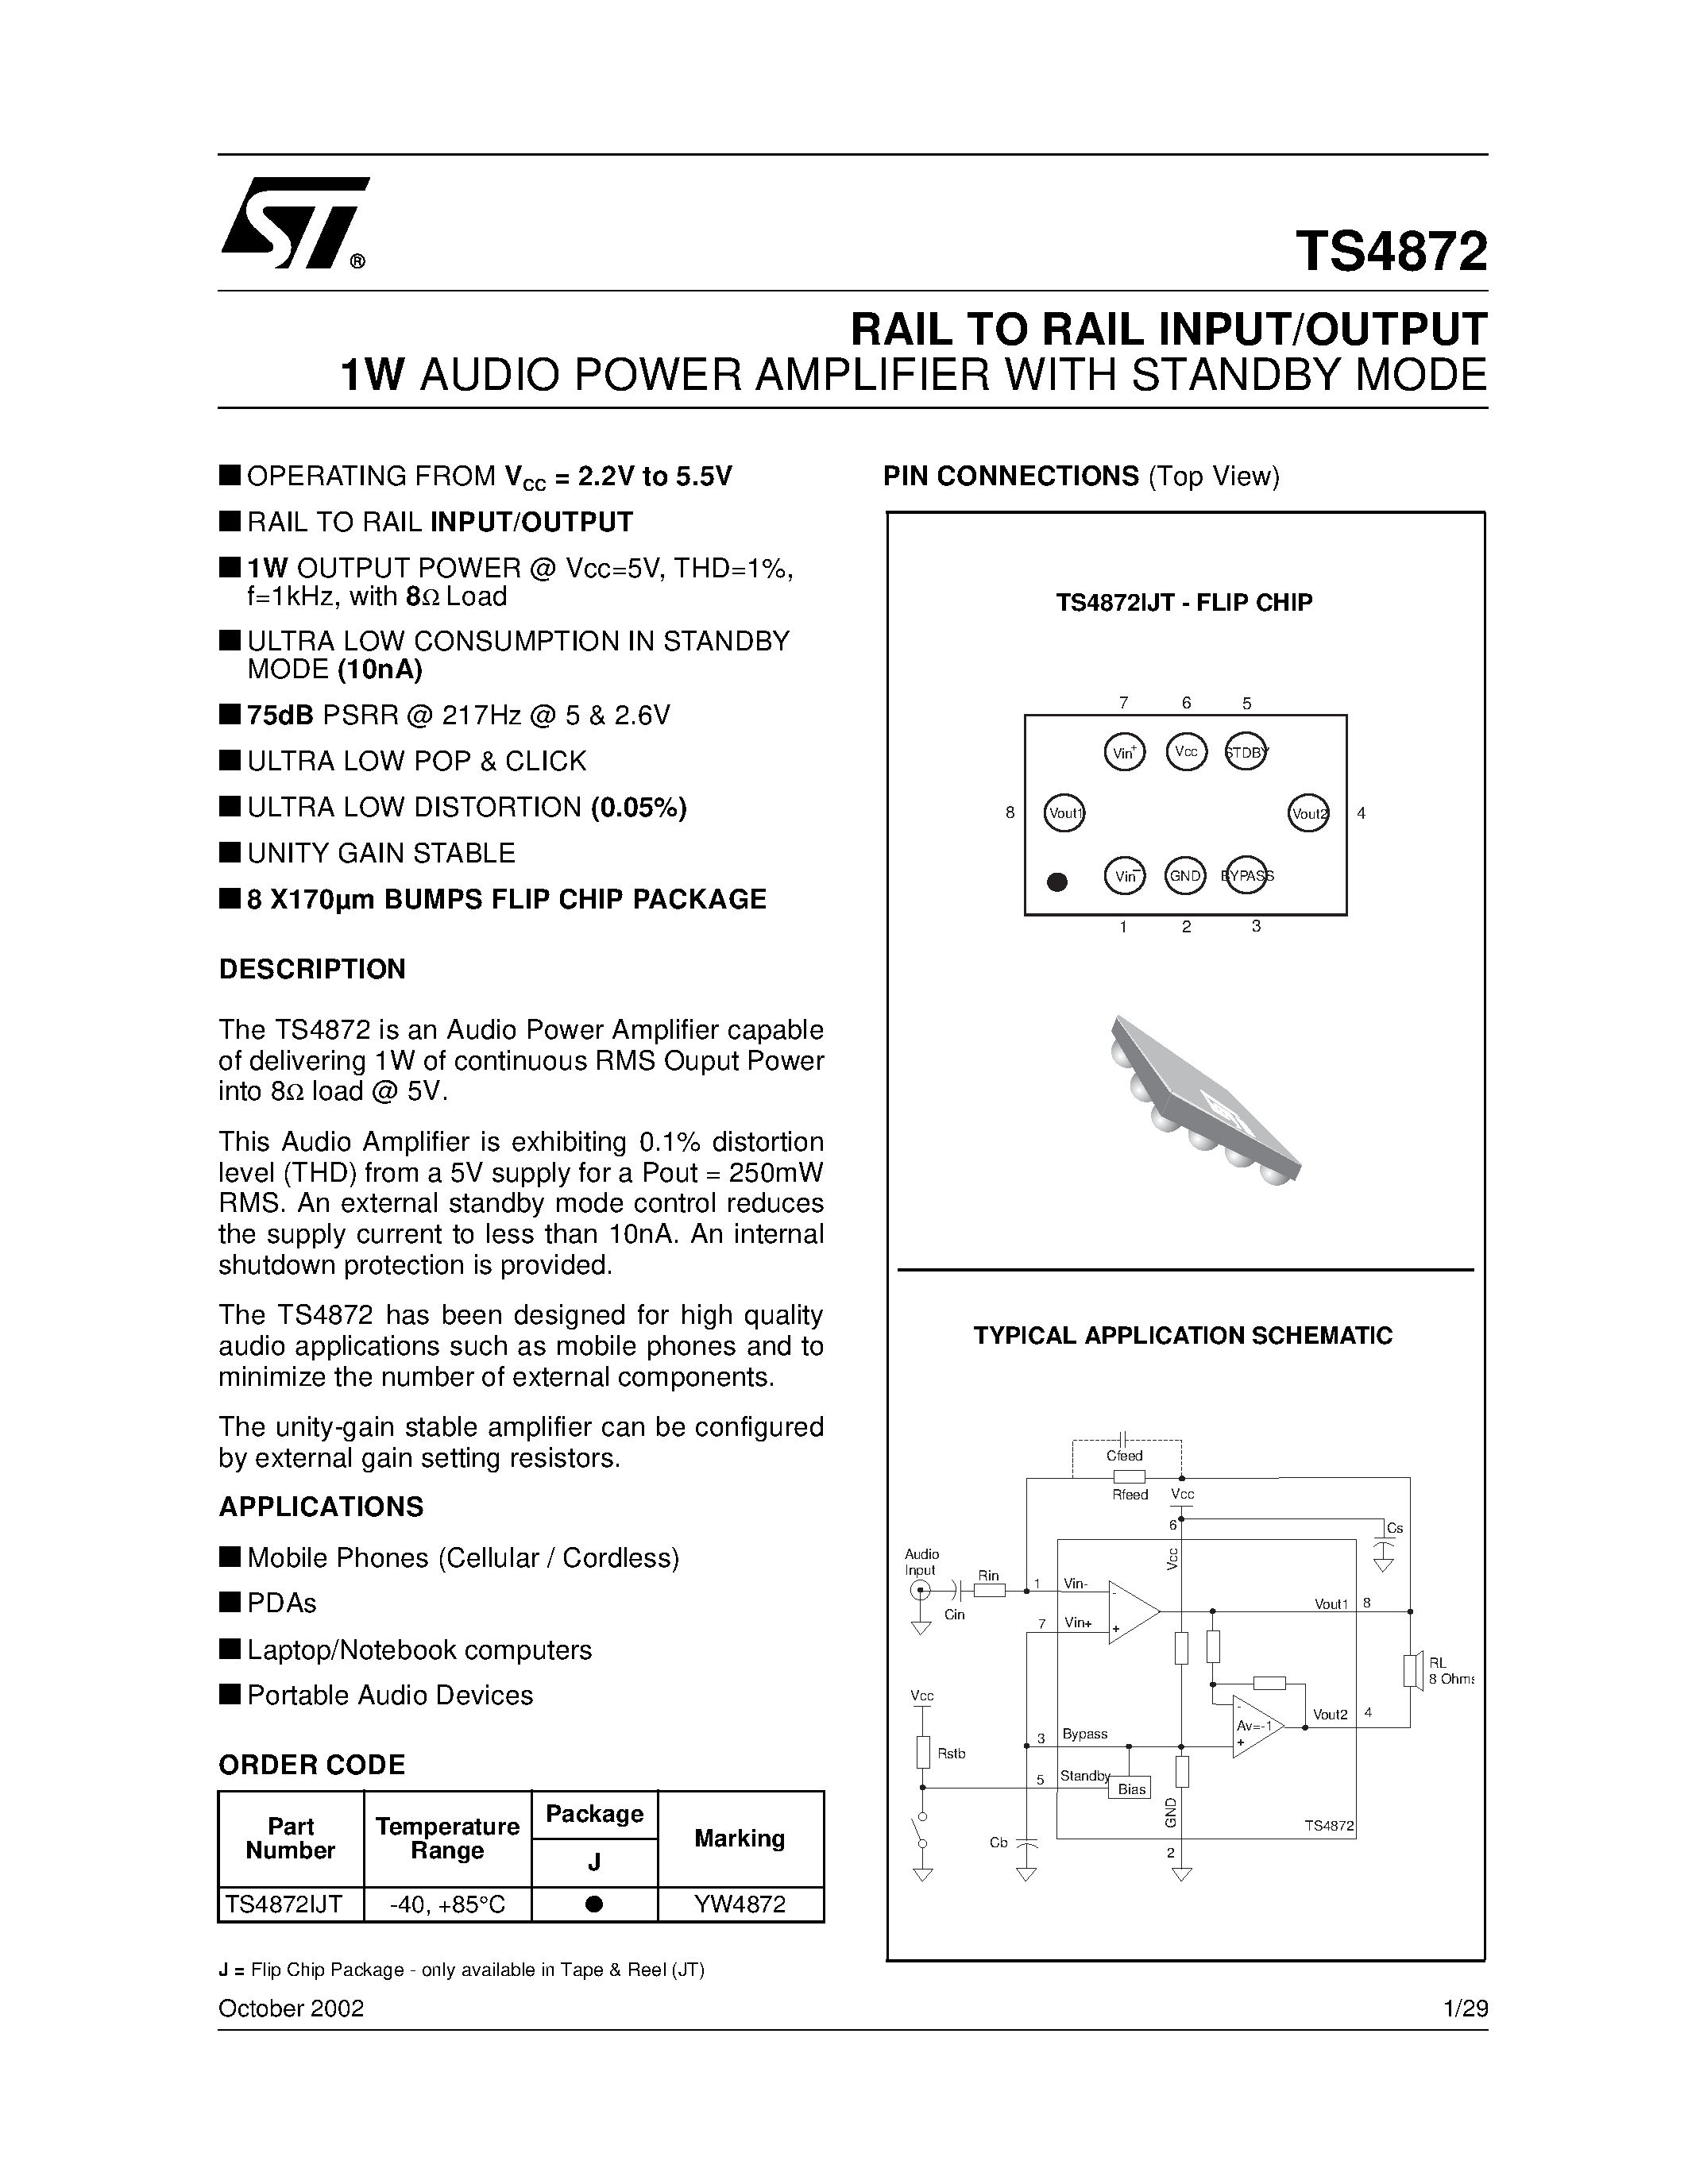 Datasheet TS4872 - RAIL TO RAIL INPUT/OUTPUT 1W AUDIO POWER AMPLIFIER WITH STANDBY MODE page 1